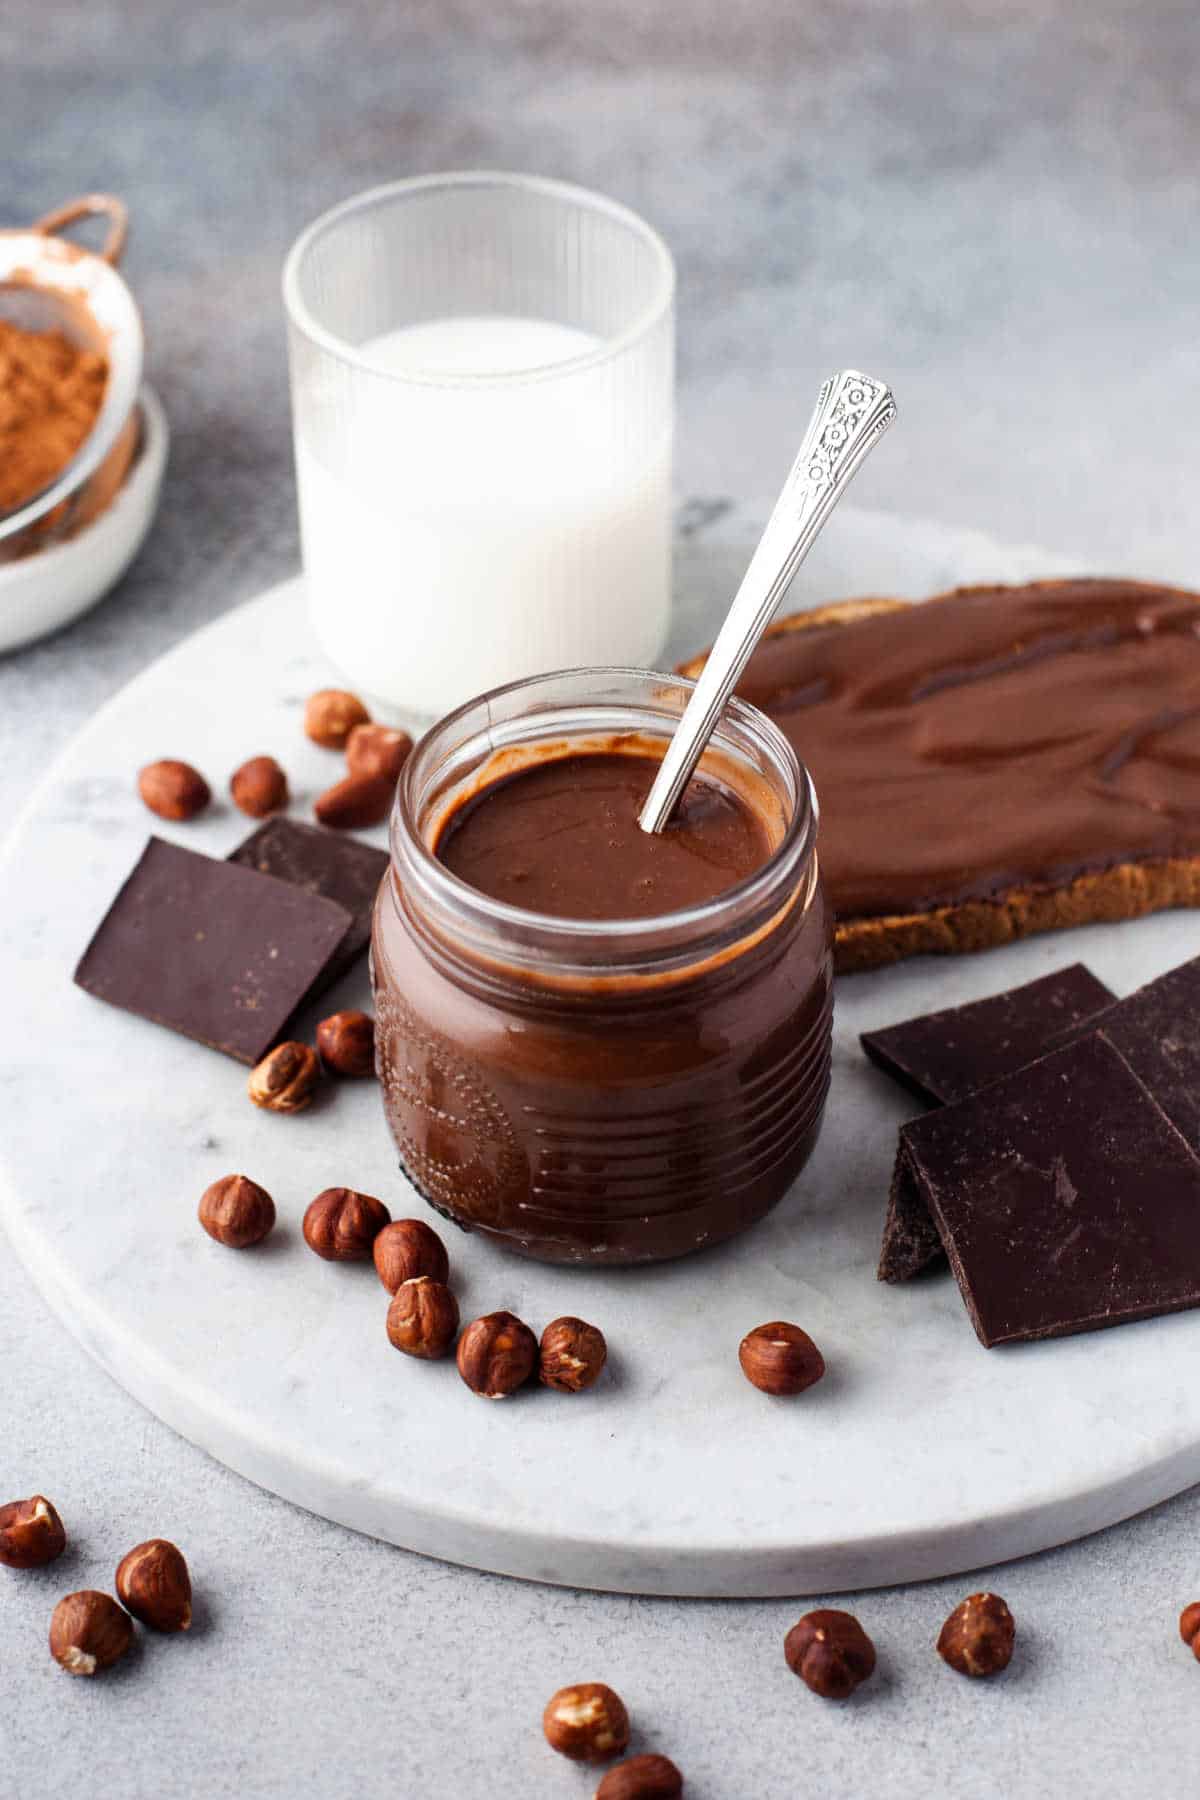 Nutella in a jar with a spoon.